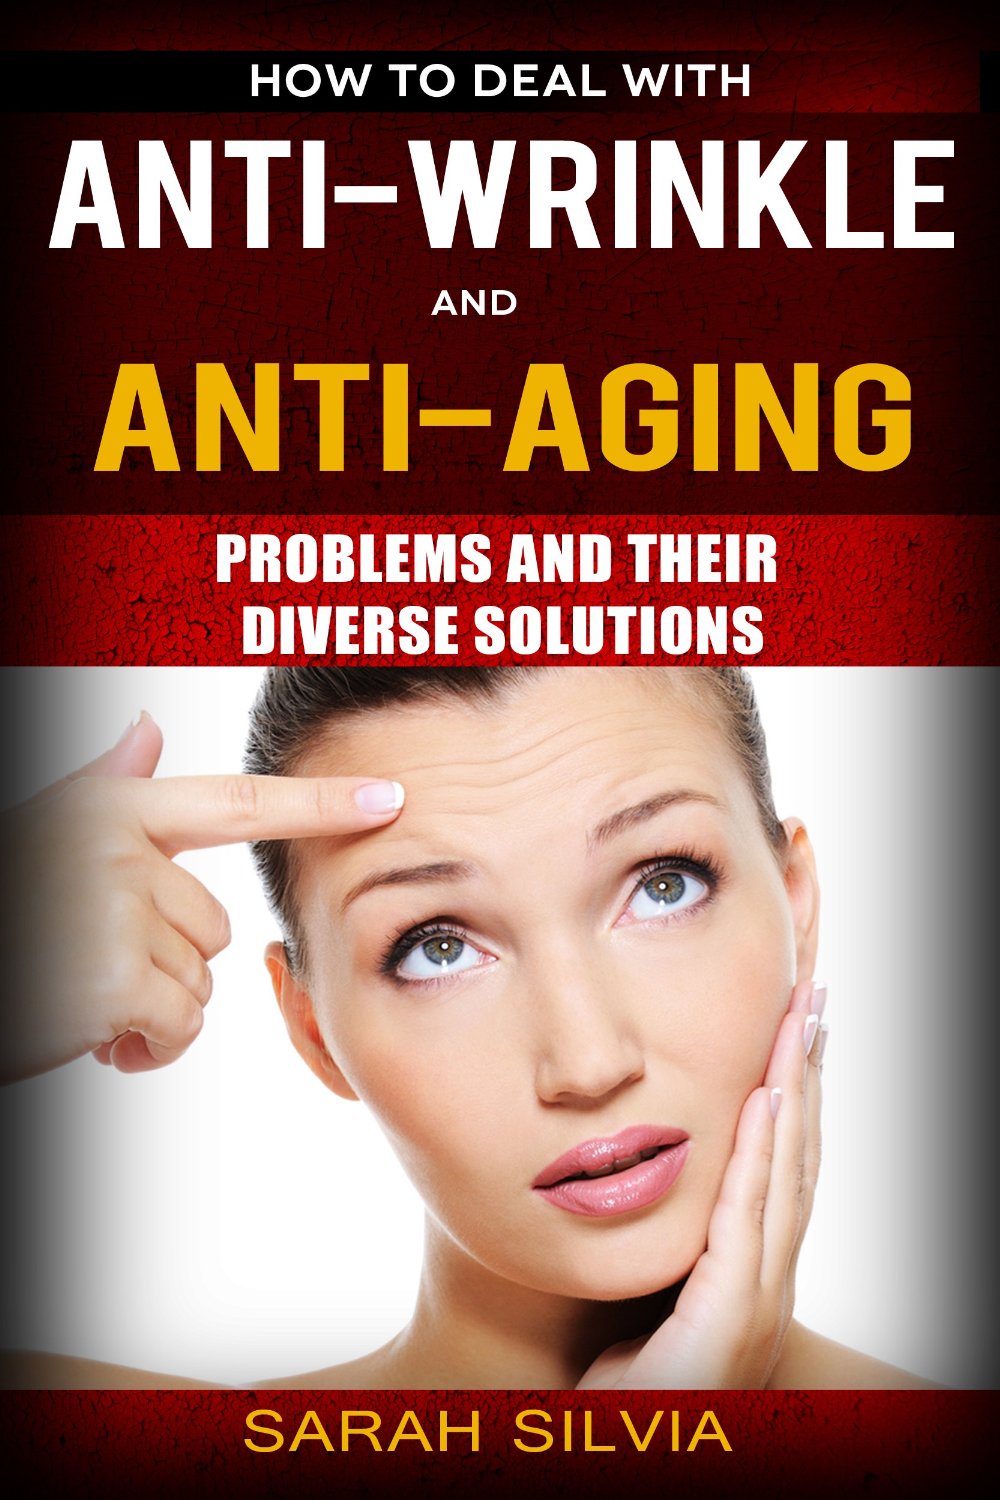 How to Deal with ANTI-WRINKLE AND Anti-Aging problems and their diverse solutions by Sarah Silvia